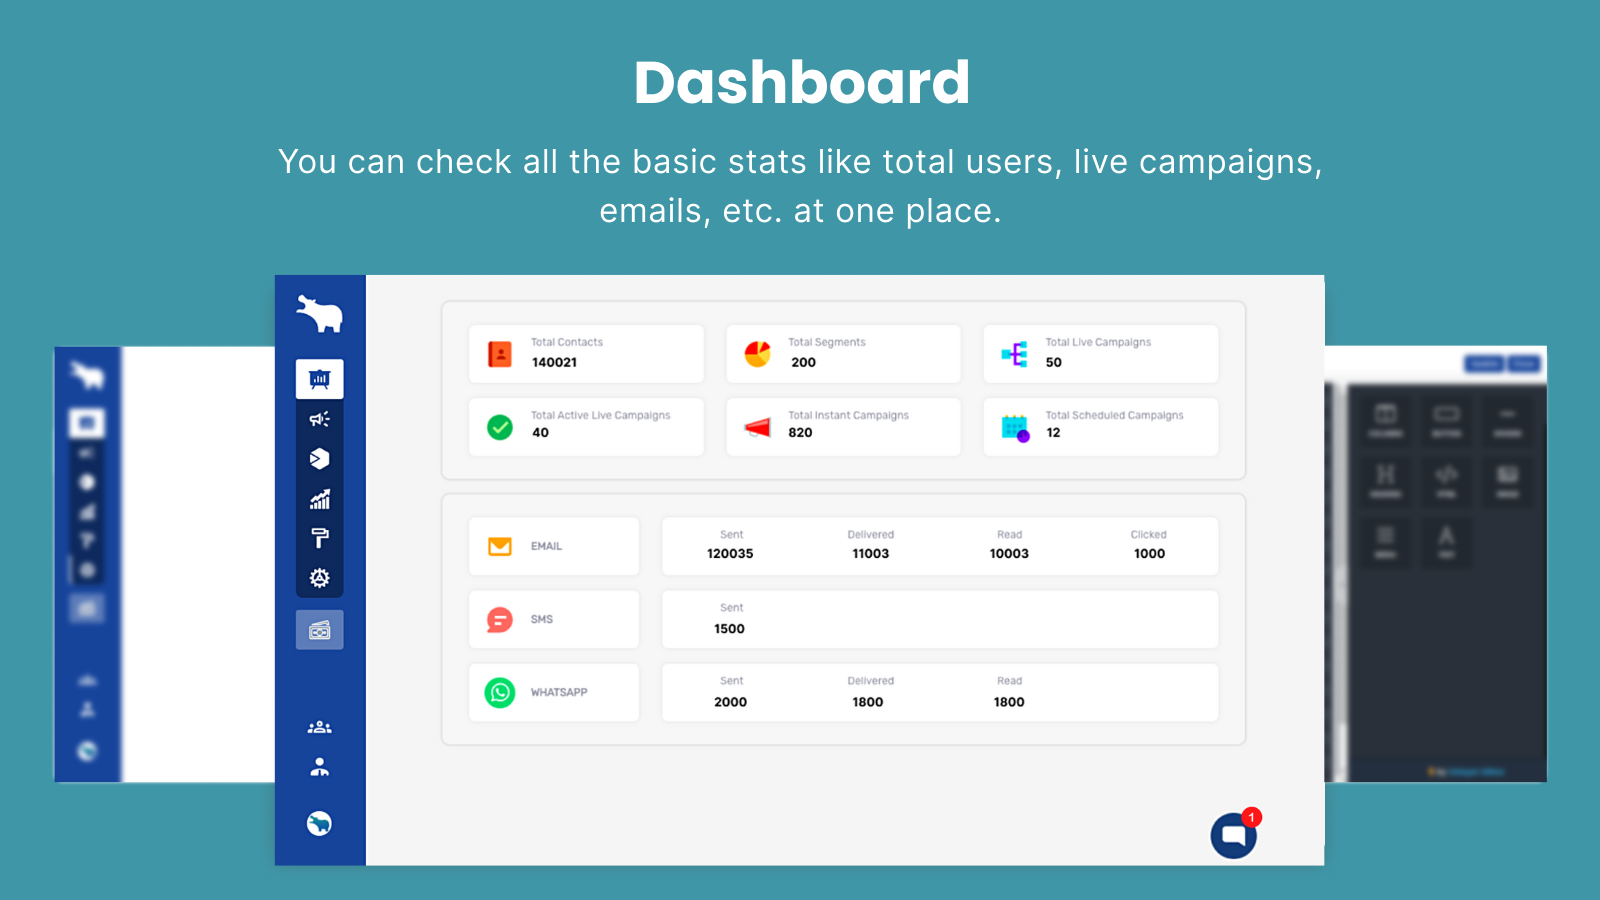 You can check all the basic stats in dashboard screen